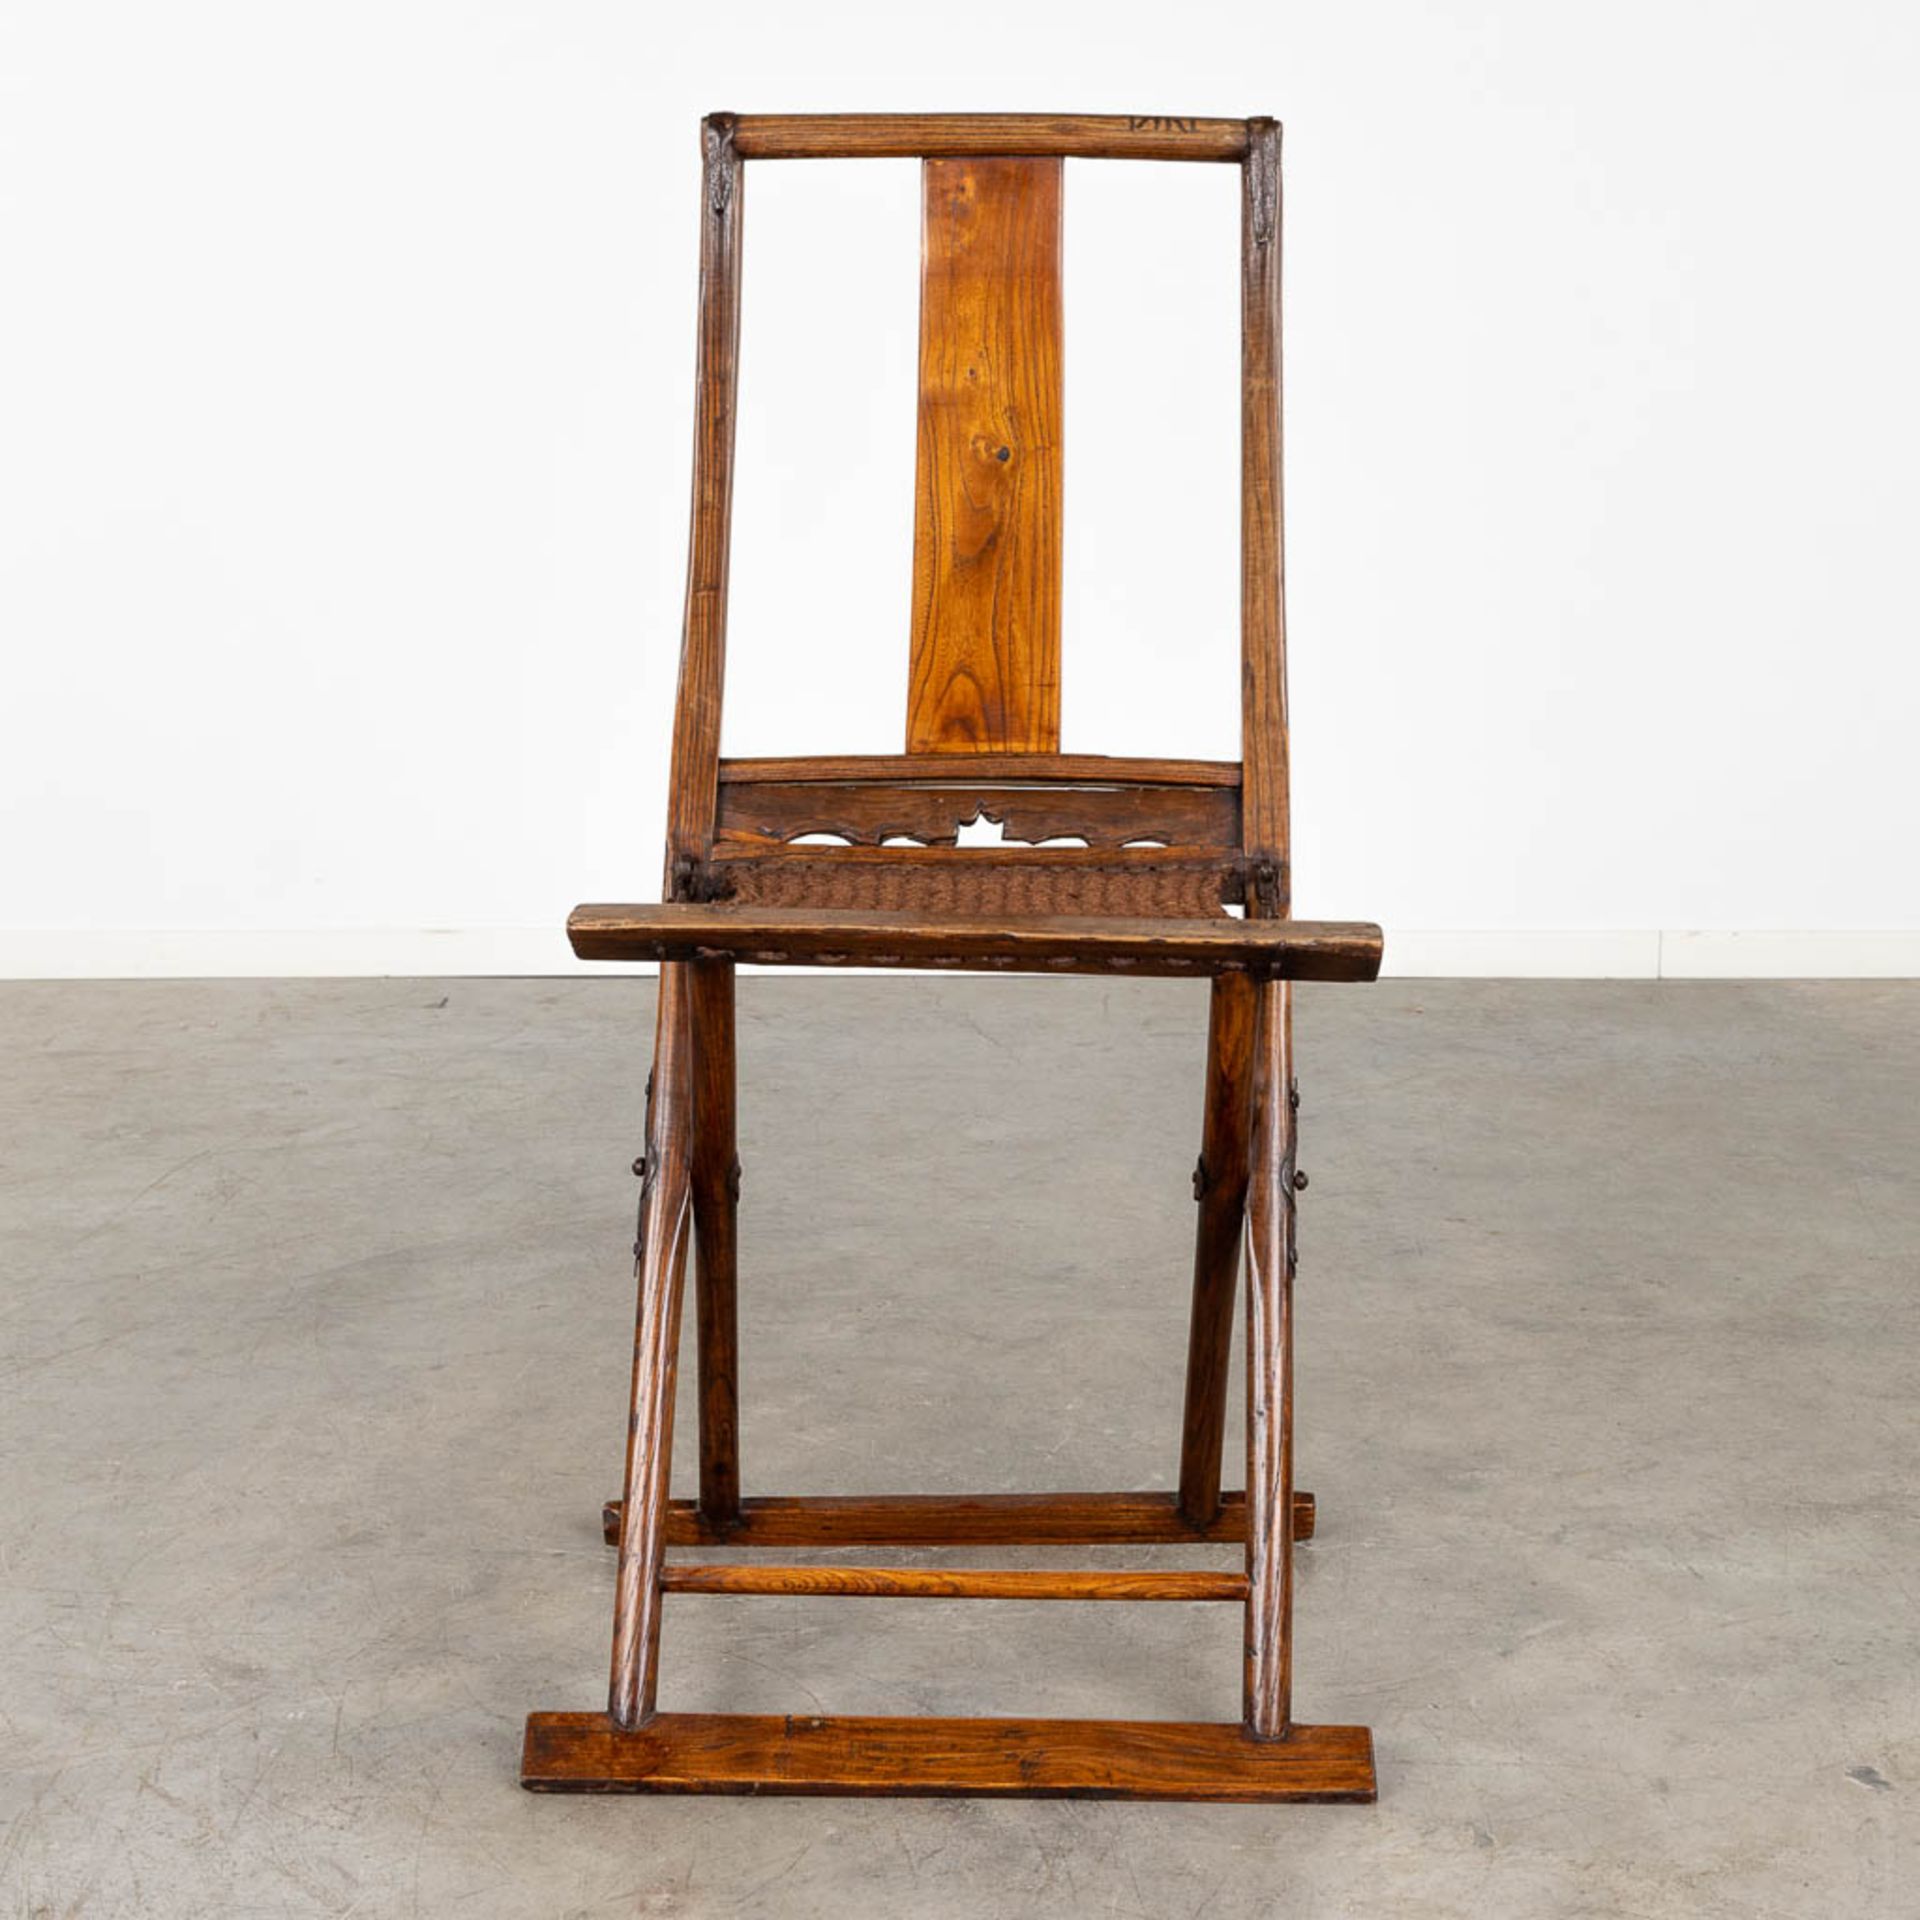 An antique Chinese travellers folding chair, probably 18th/19th C. (D:50 x W:60 x H:116 cm) - Image 3 of 12